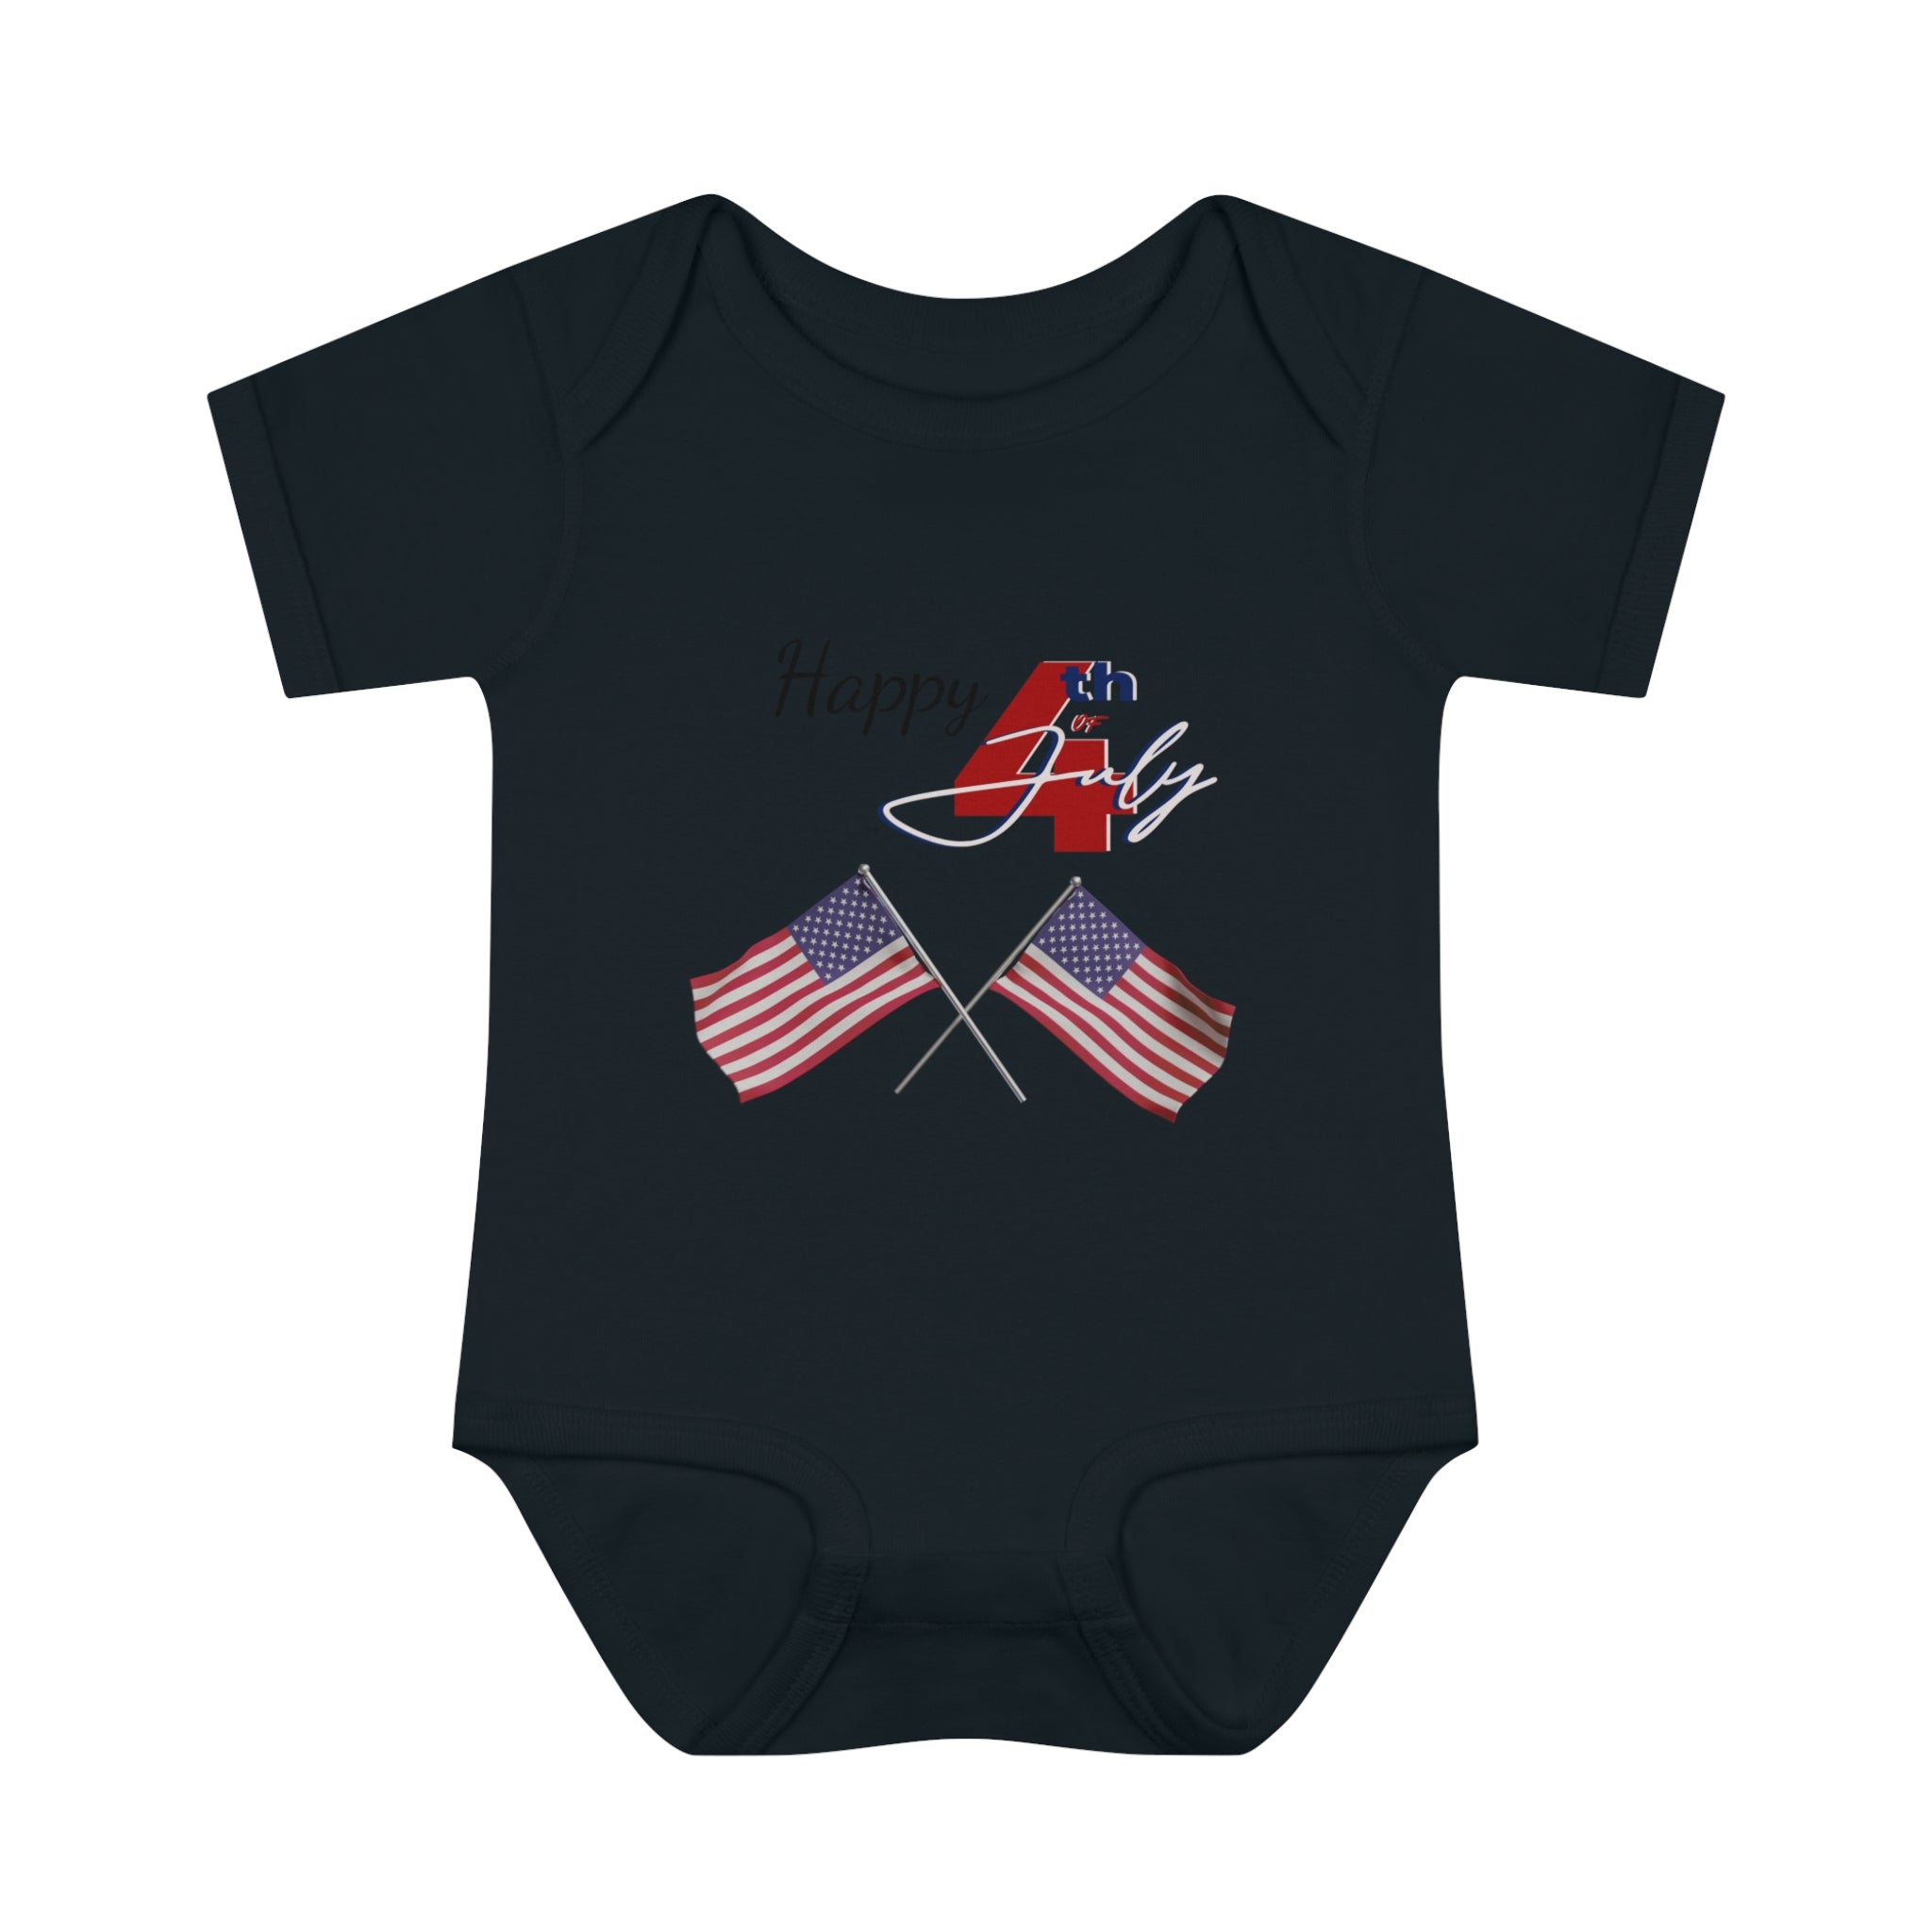 Happy 4th of July American Flags design Baby Bodysuit